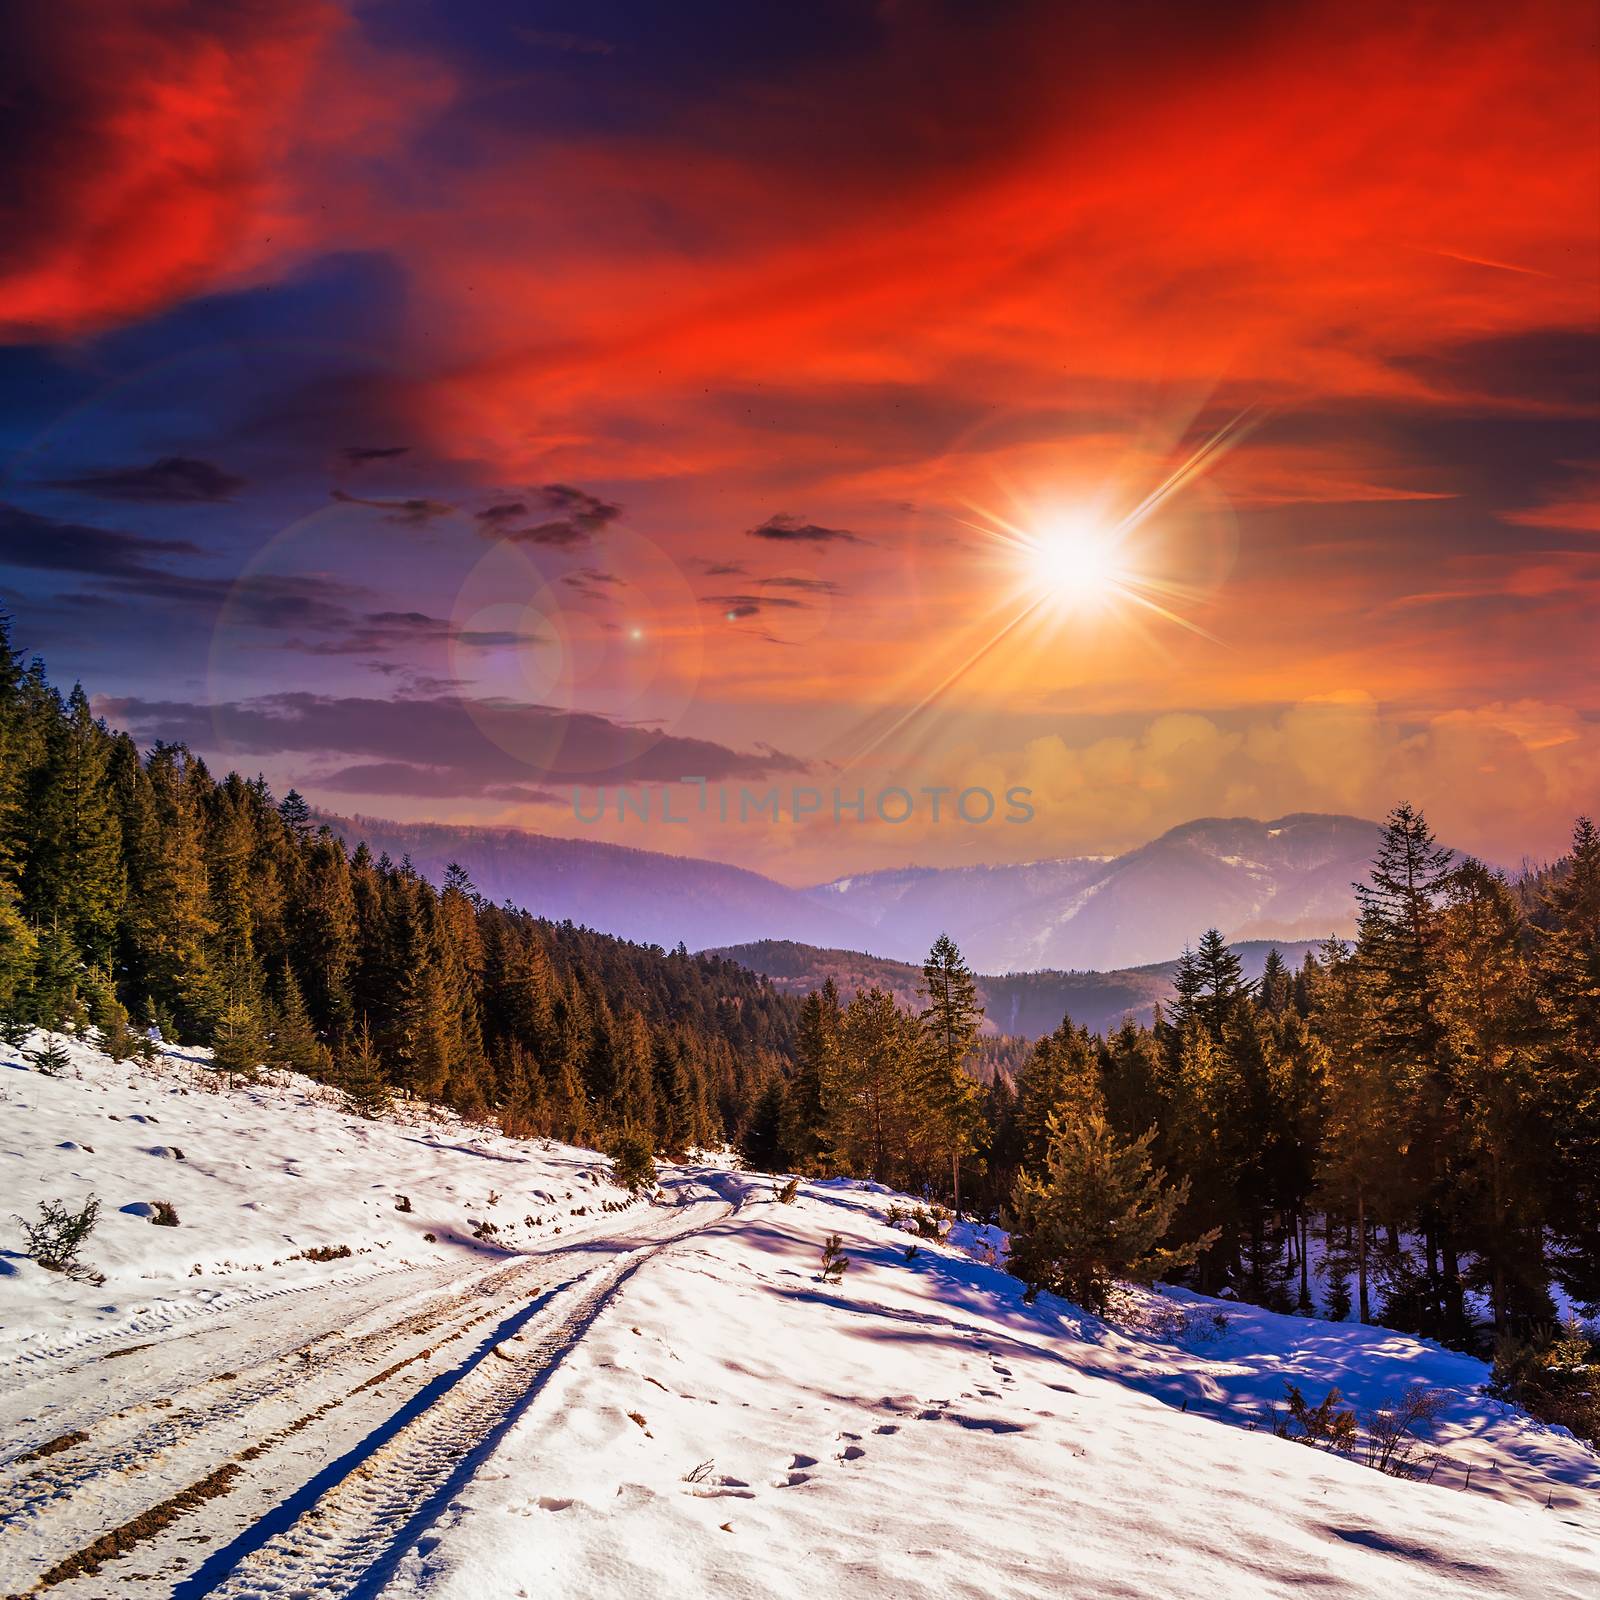 snowy road to coniferous forest in mountains at sunset by Pellinni